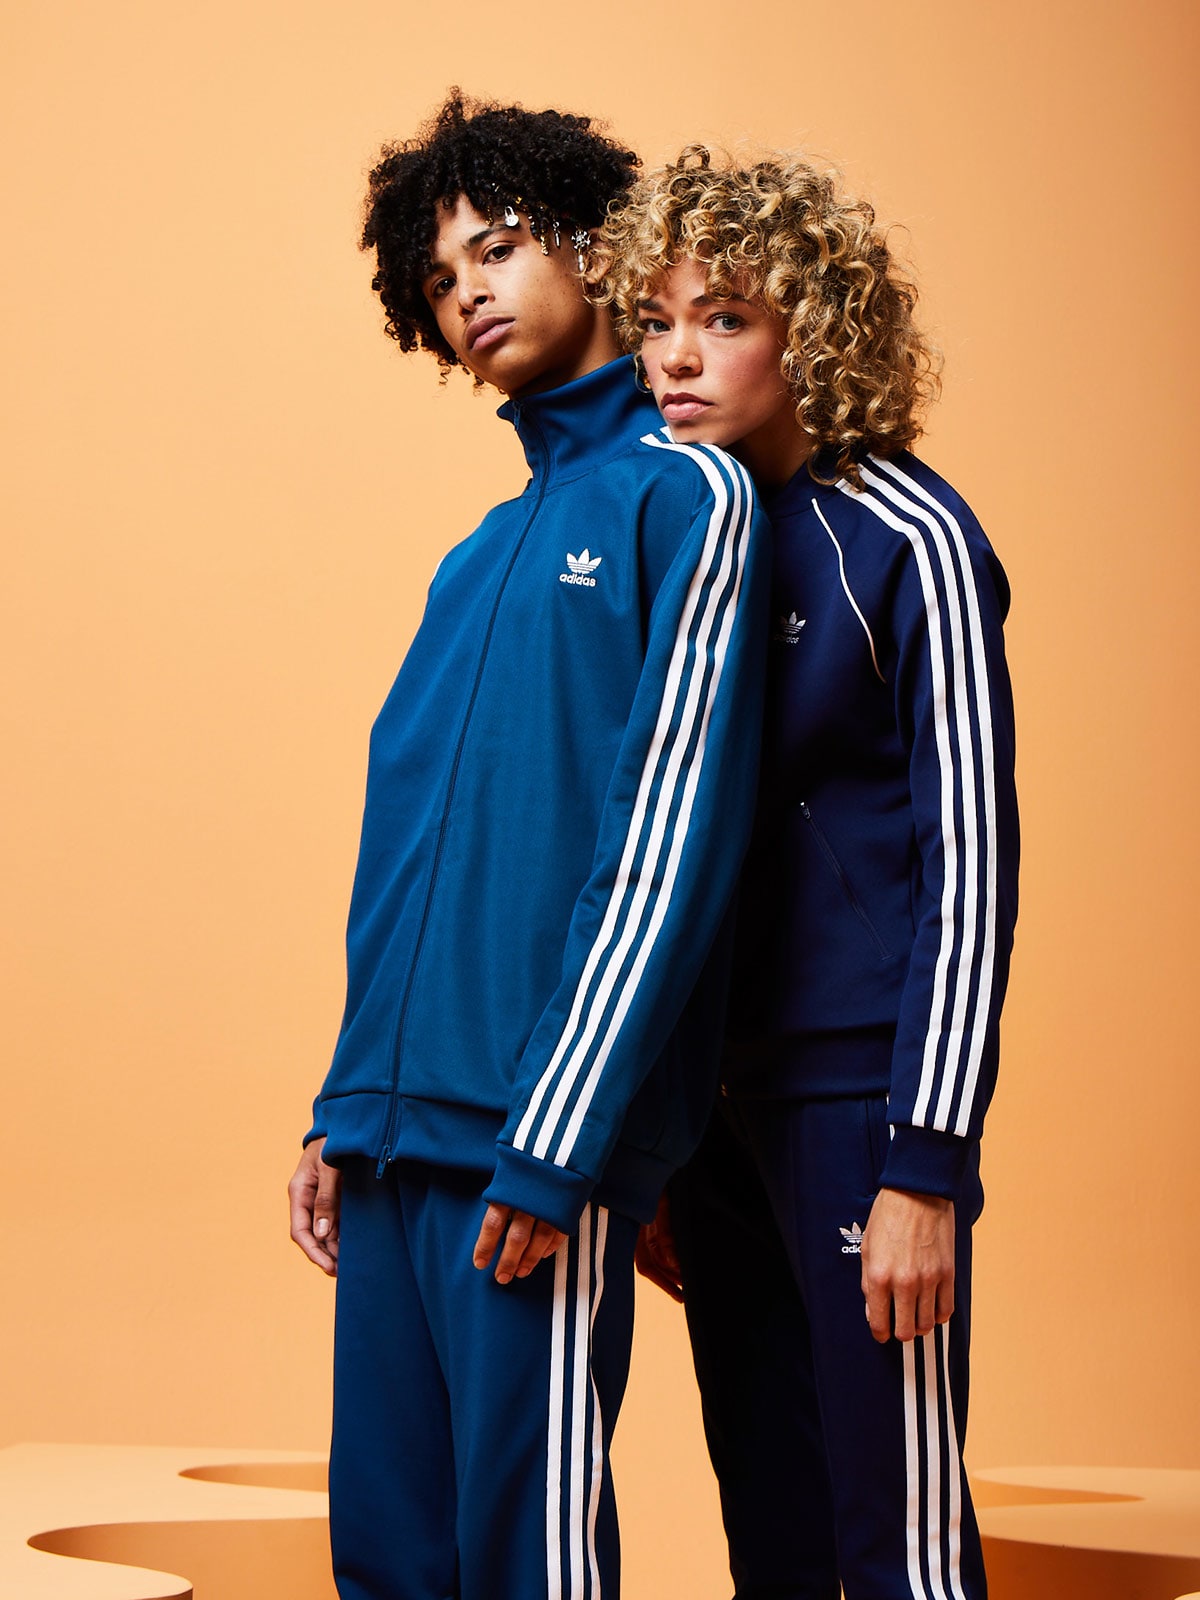 create your own adidas tracksuit